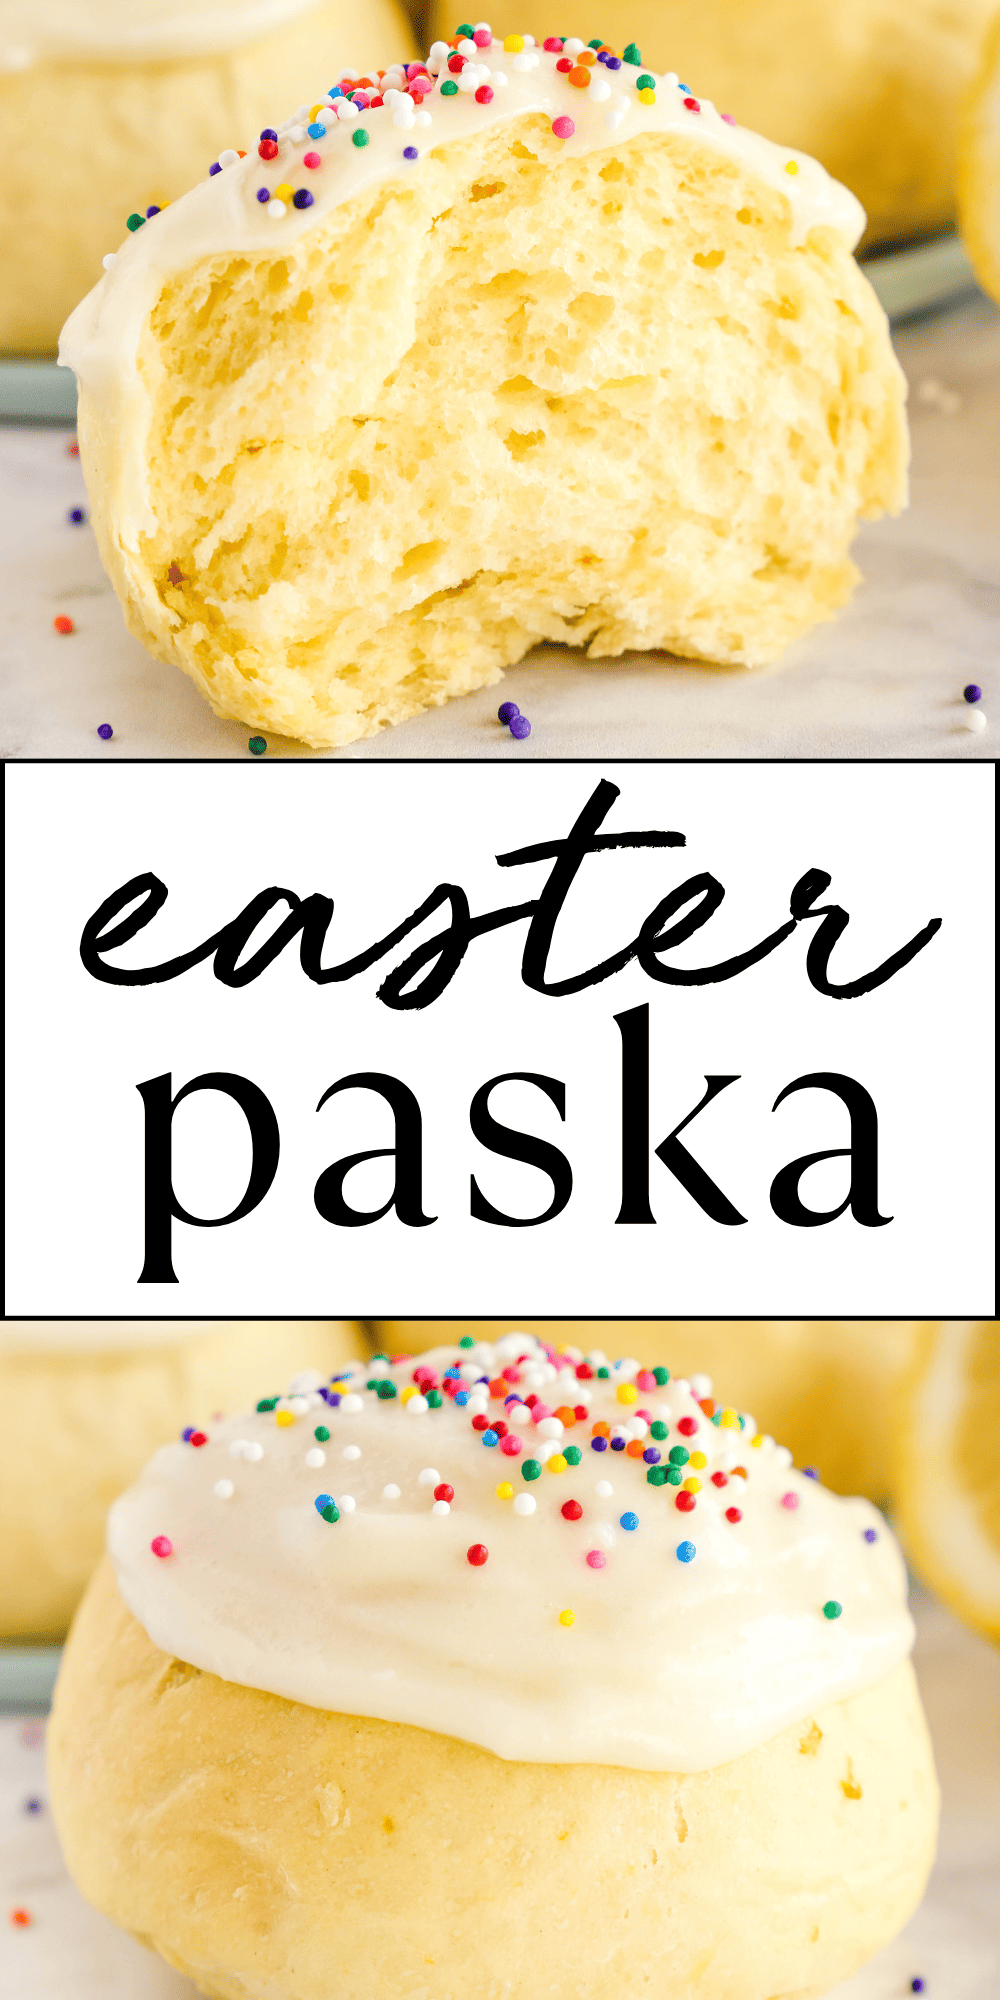 These Paska Buns and Bread are the perfect sweet treat for Easter or spring! Made with a fresh citrus-infused simple sweet dough, creamy frosting and sprinkles! Recipe from thebusybaker.ca! #easterbread #easterpaskabuns #easterpaskabread #paska #easter #baking #easterbaking #easterrecipe #sweetbread #sweetbuns via @busybakerblog